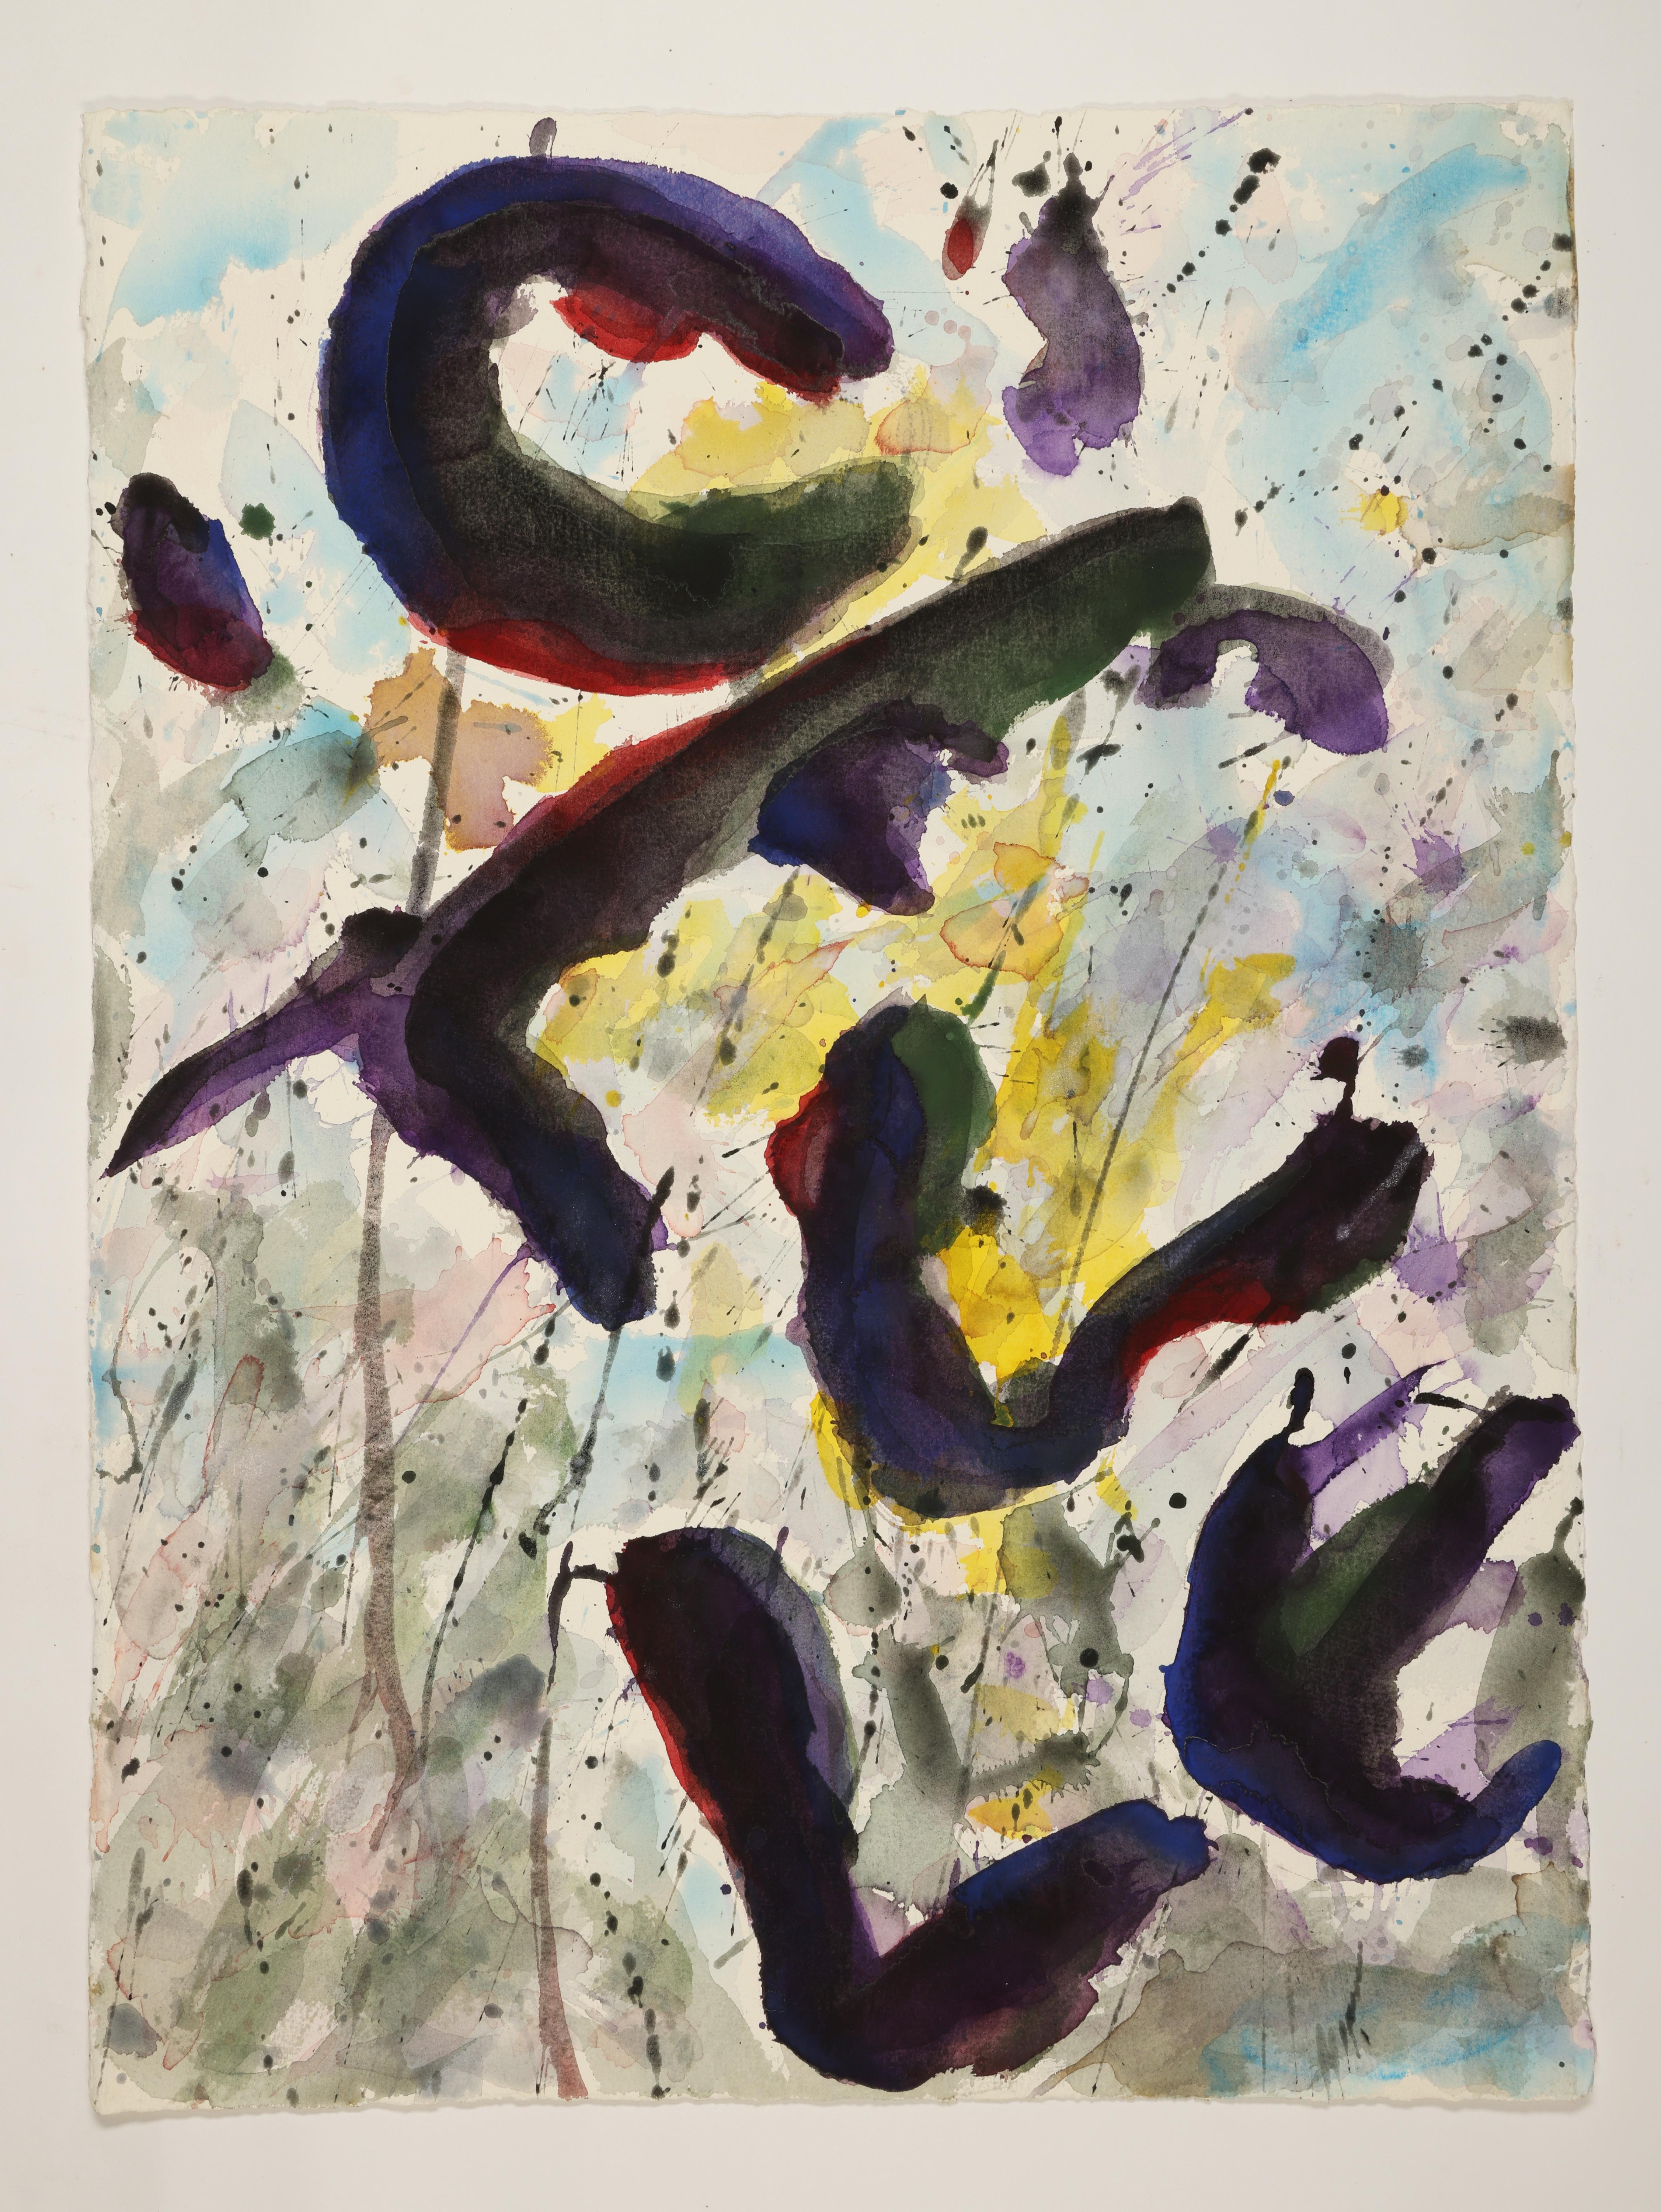 Abstract Watercolor Painting, 'Design for Space', C. 1998 by David Ruth